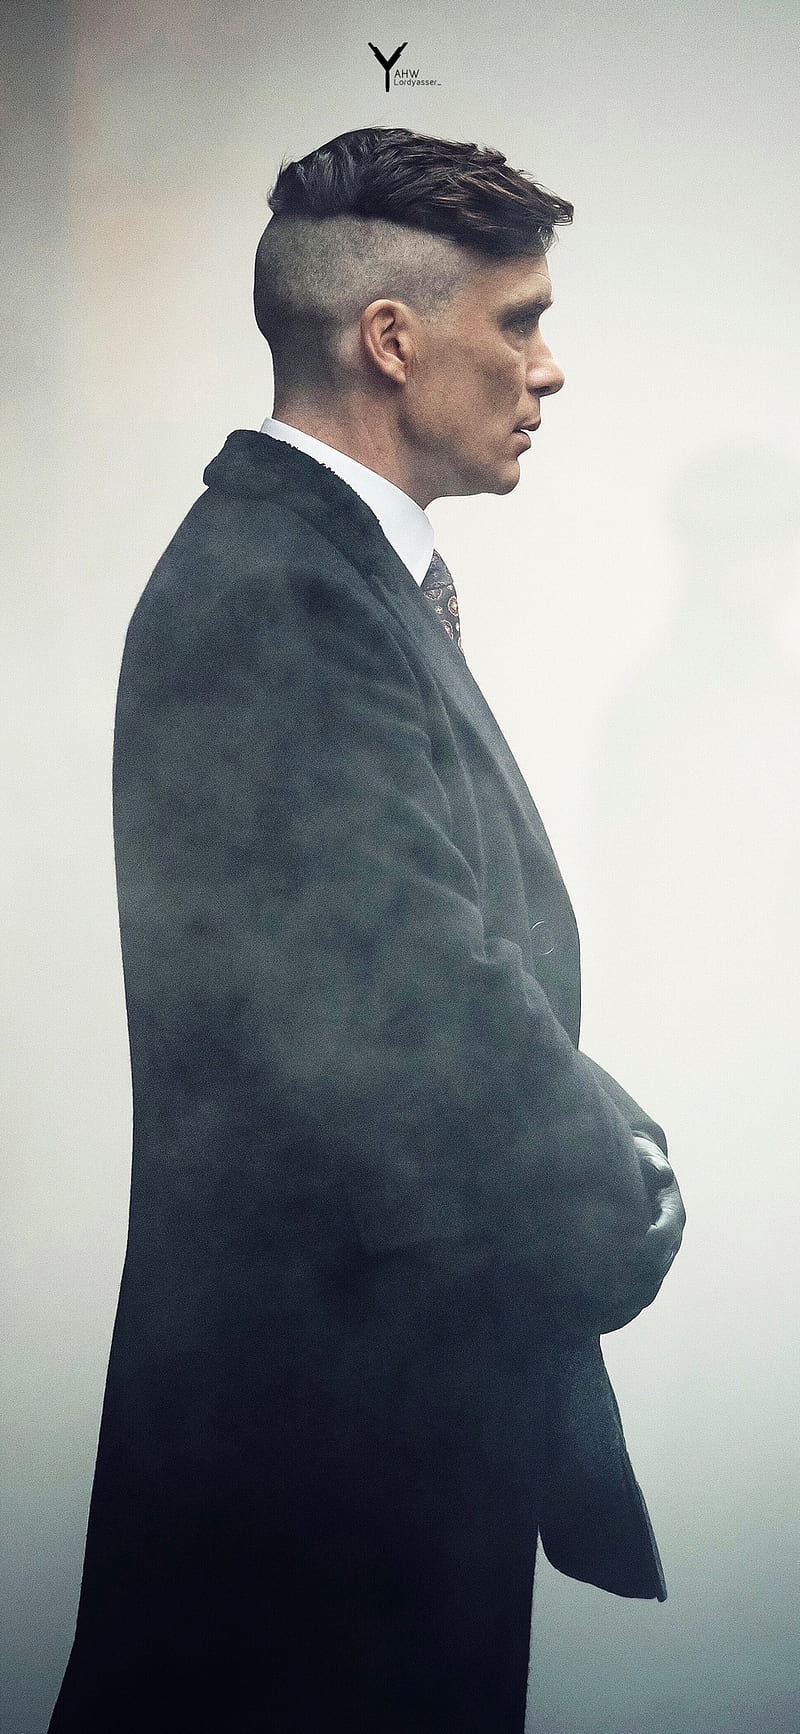 Tommy Shelby wallpaper by SoggyTaco94  Download on ZEDGE  a1a4